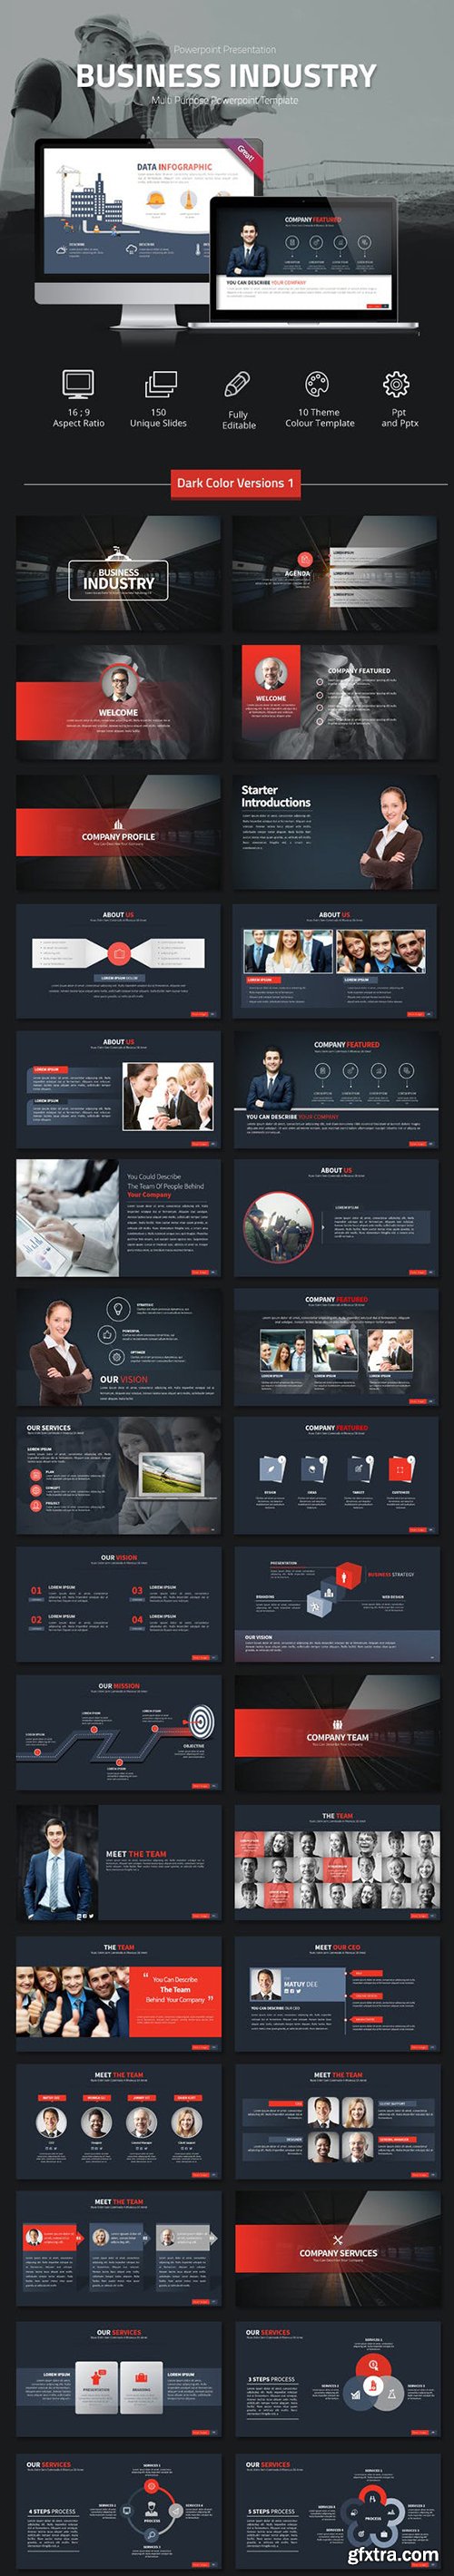 Graphicriver - Business Industry Powerpoint Presentation 11333677